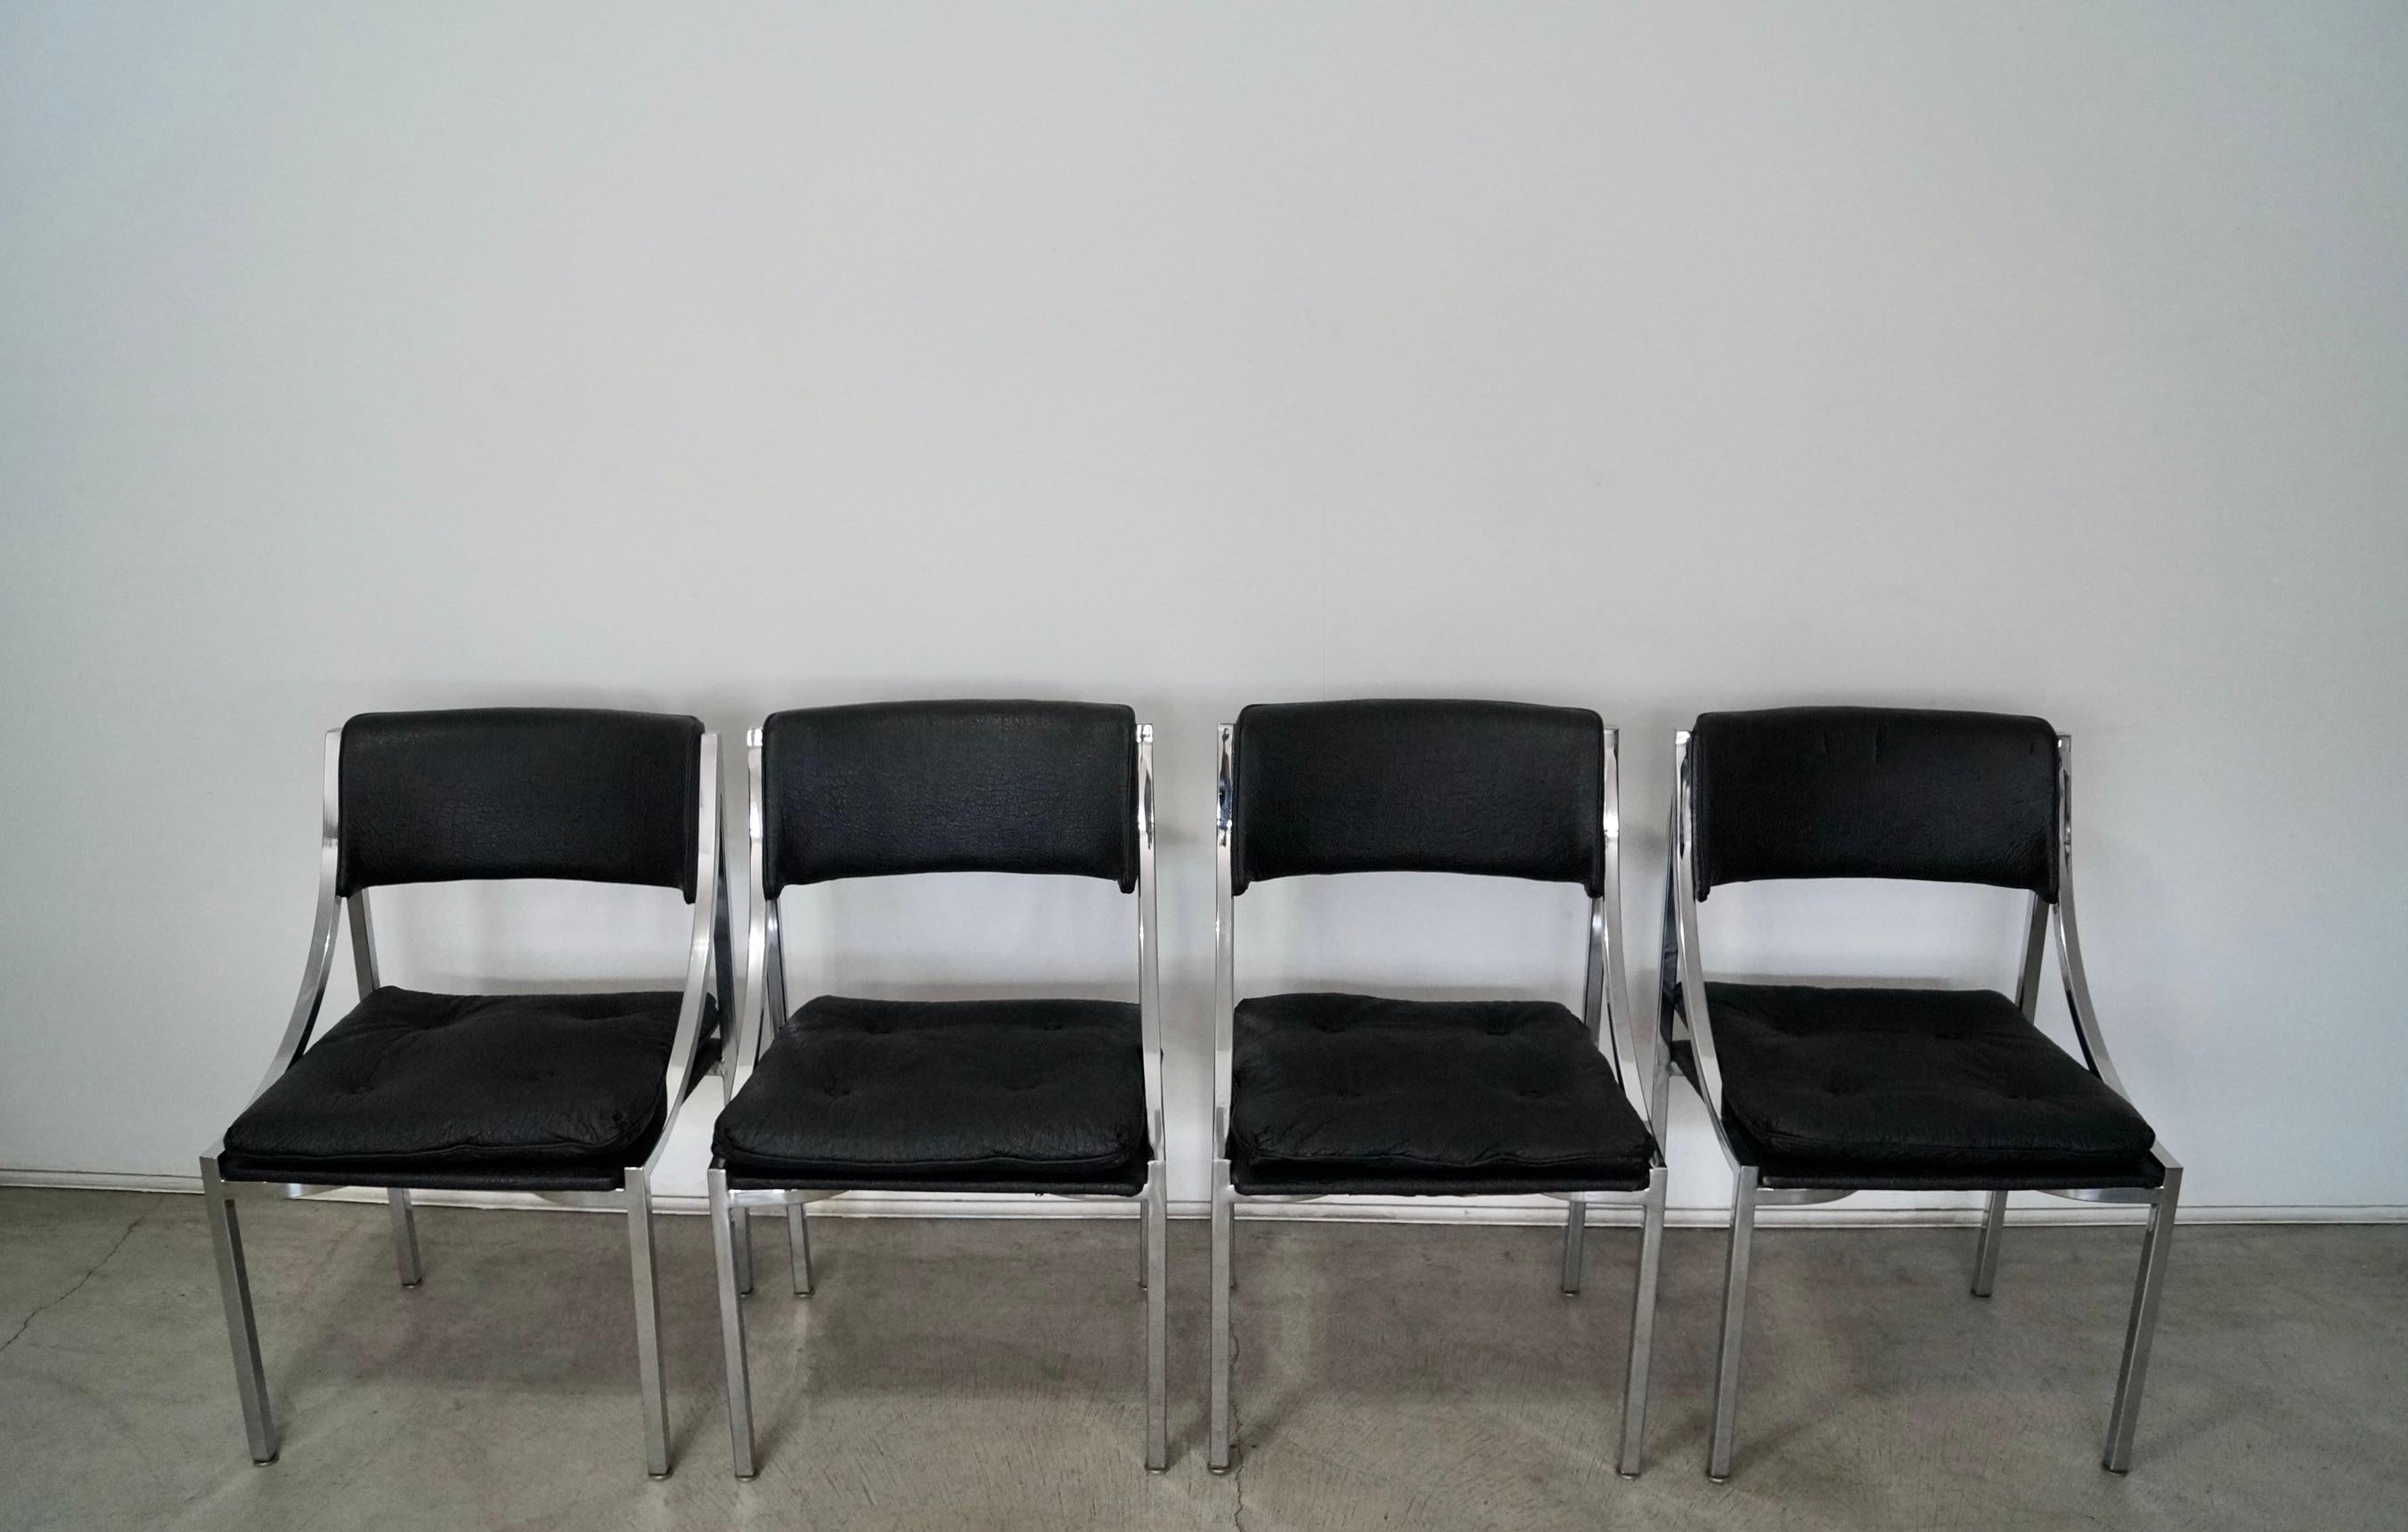 Mid-century Modern Bauhaus dining chair set for sale. Set of four chairs from the late 1960’s. Manufactured by Howell in California, and very rare. They have a solid chrome frame with an imitation leather vinyl with texture. The chairs have a loose